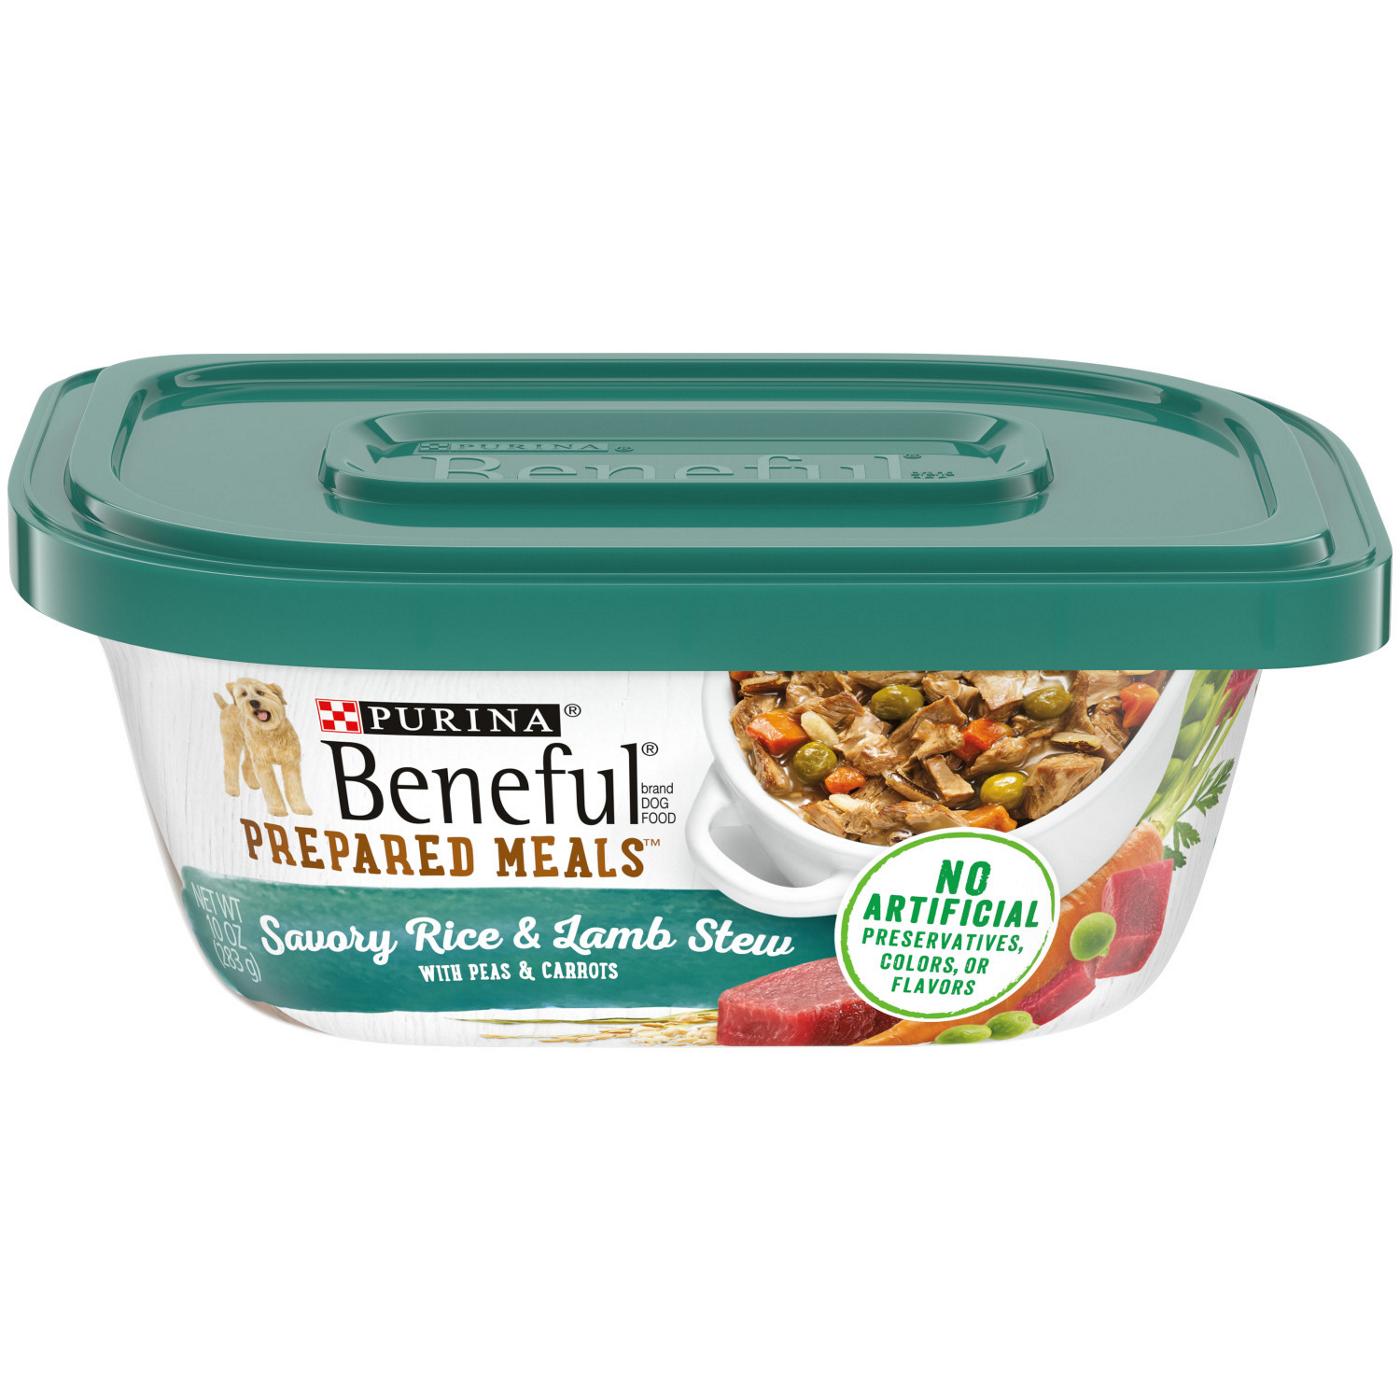 Beneful Purina Beneful High Protein Wet Dog Food With Gravy, Prepared Meals Savory Rice & Lamb Stew; image 1 of 8